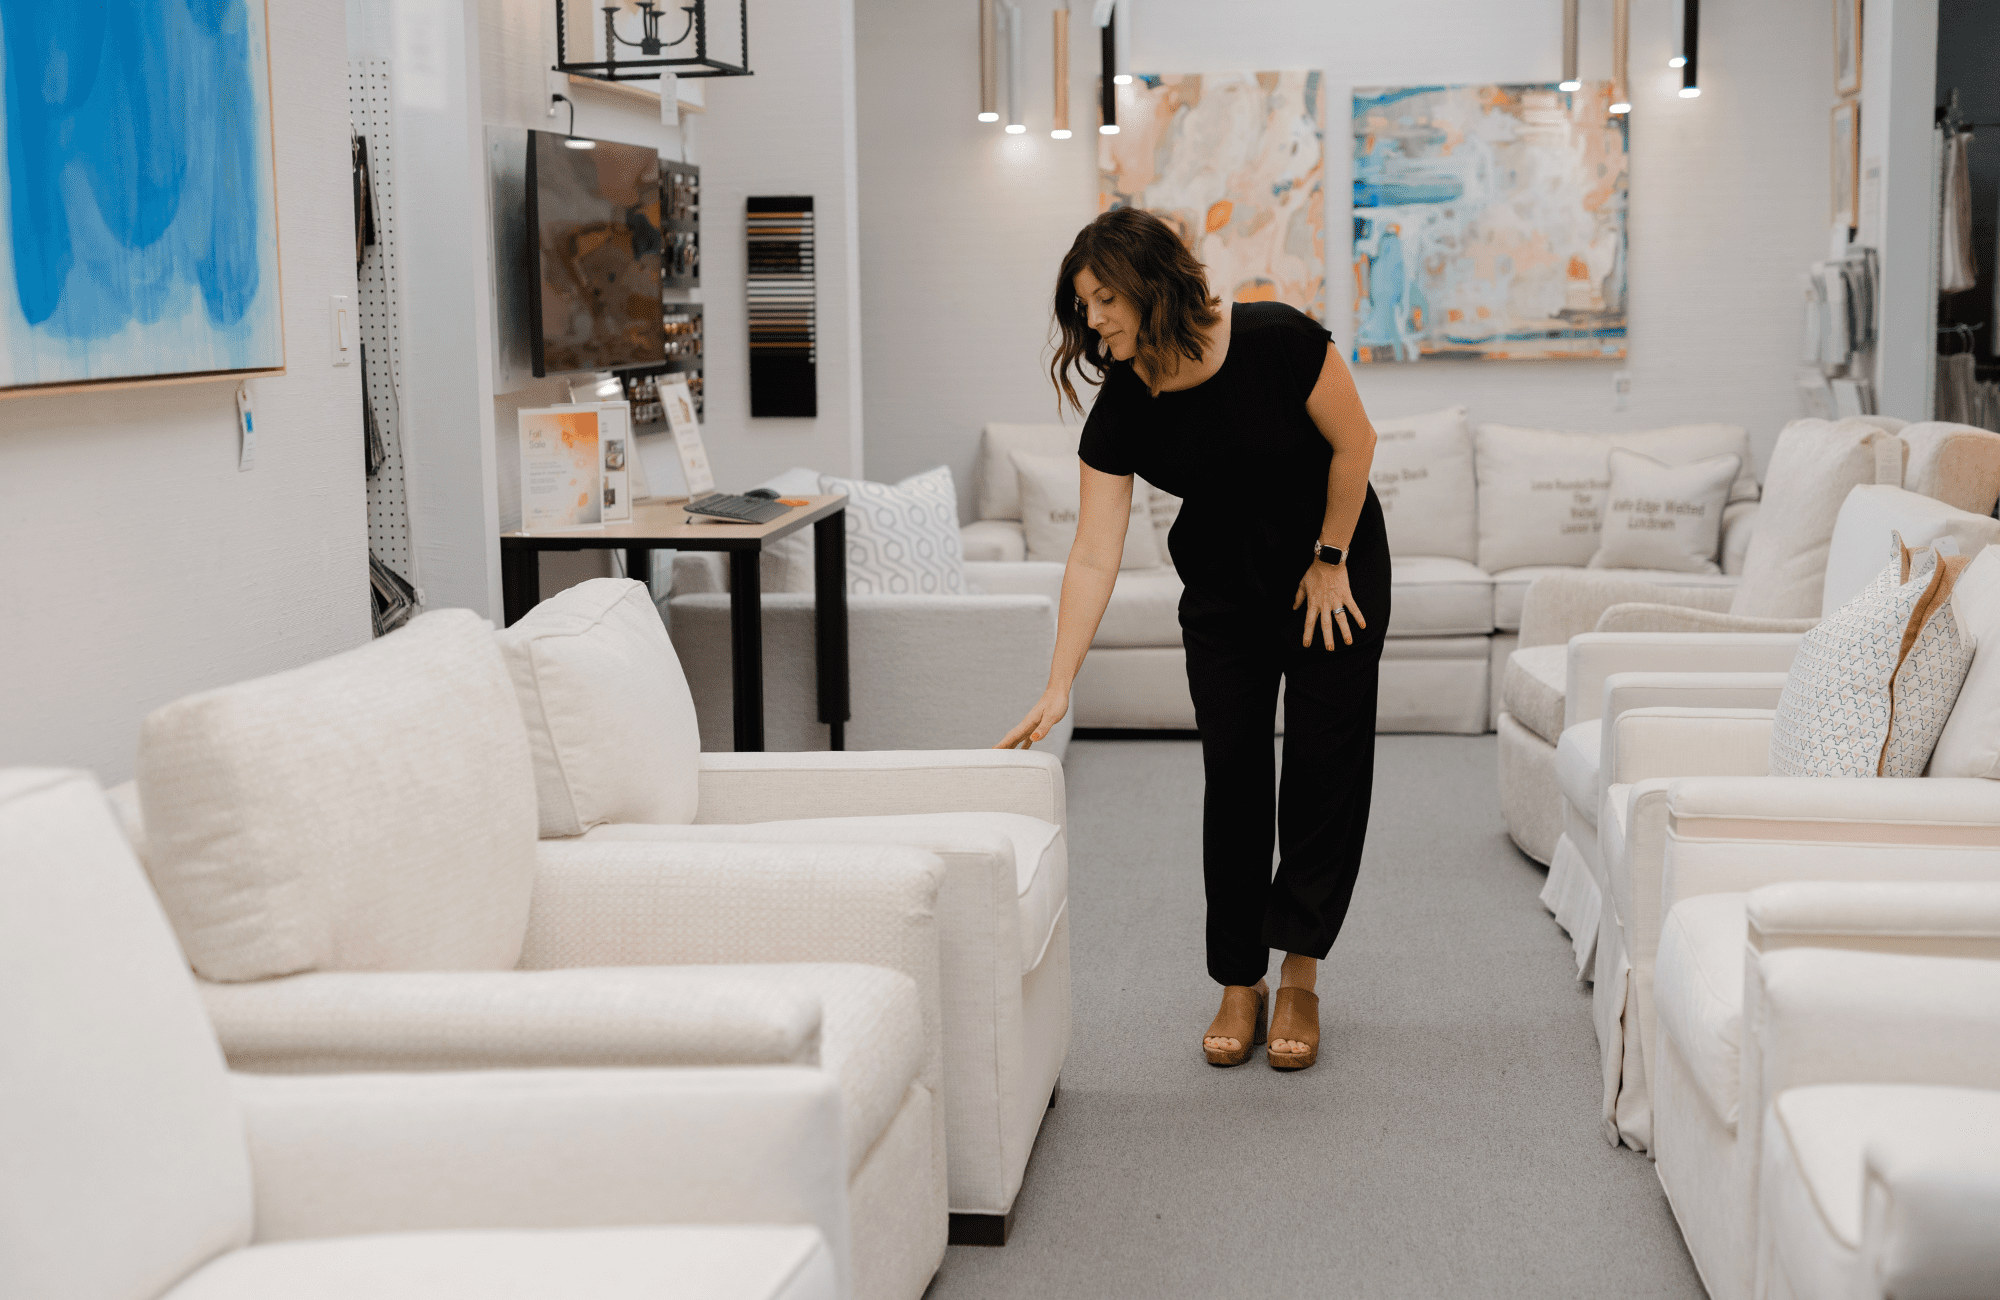 home-furnishings-interior-design-hunters-creek-tx-inside-our-designer-showroom-shawna-percival-sit-testing-chairs-in-chair-gallery-fresh